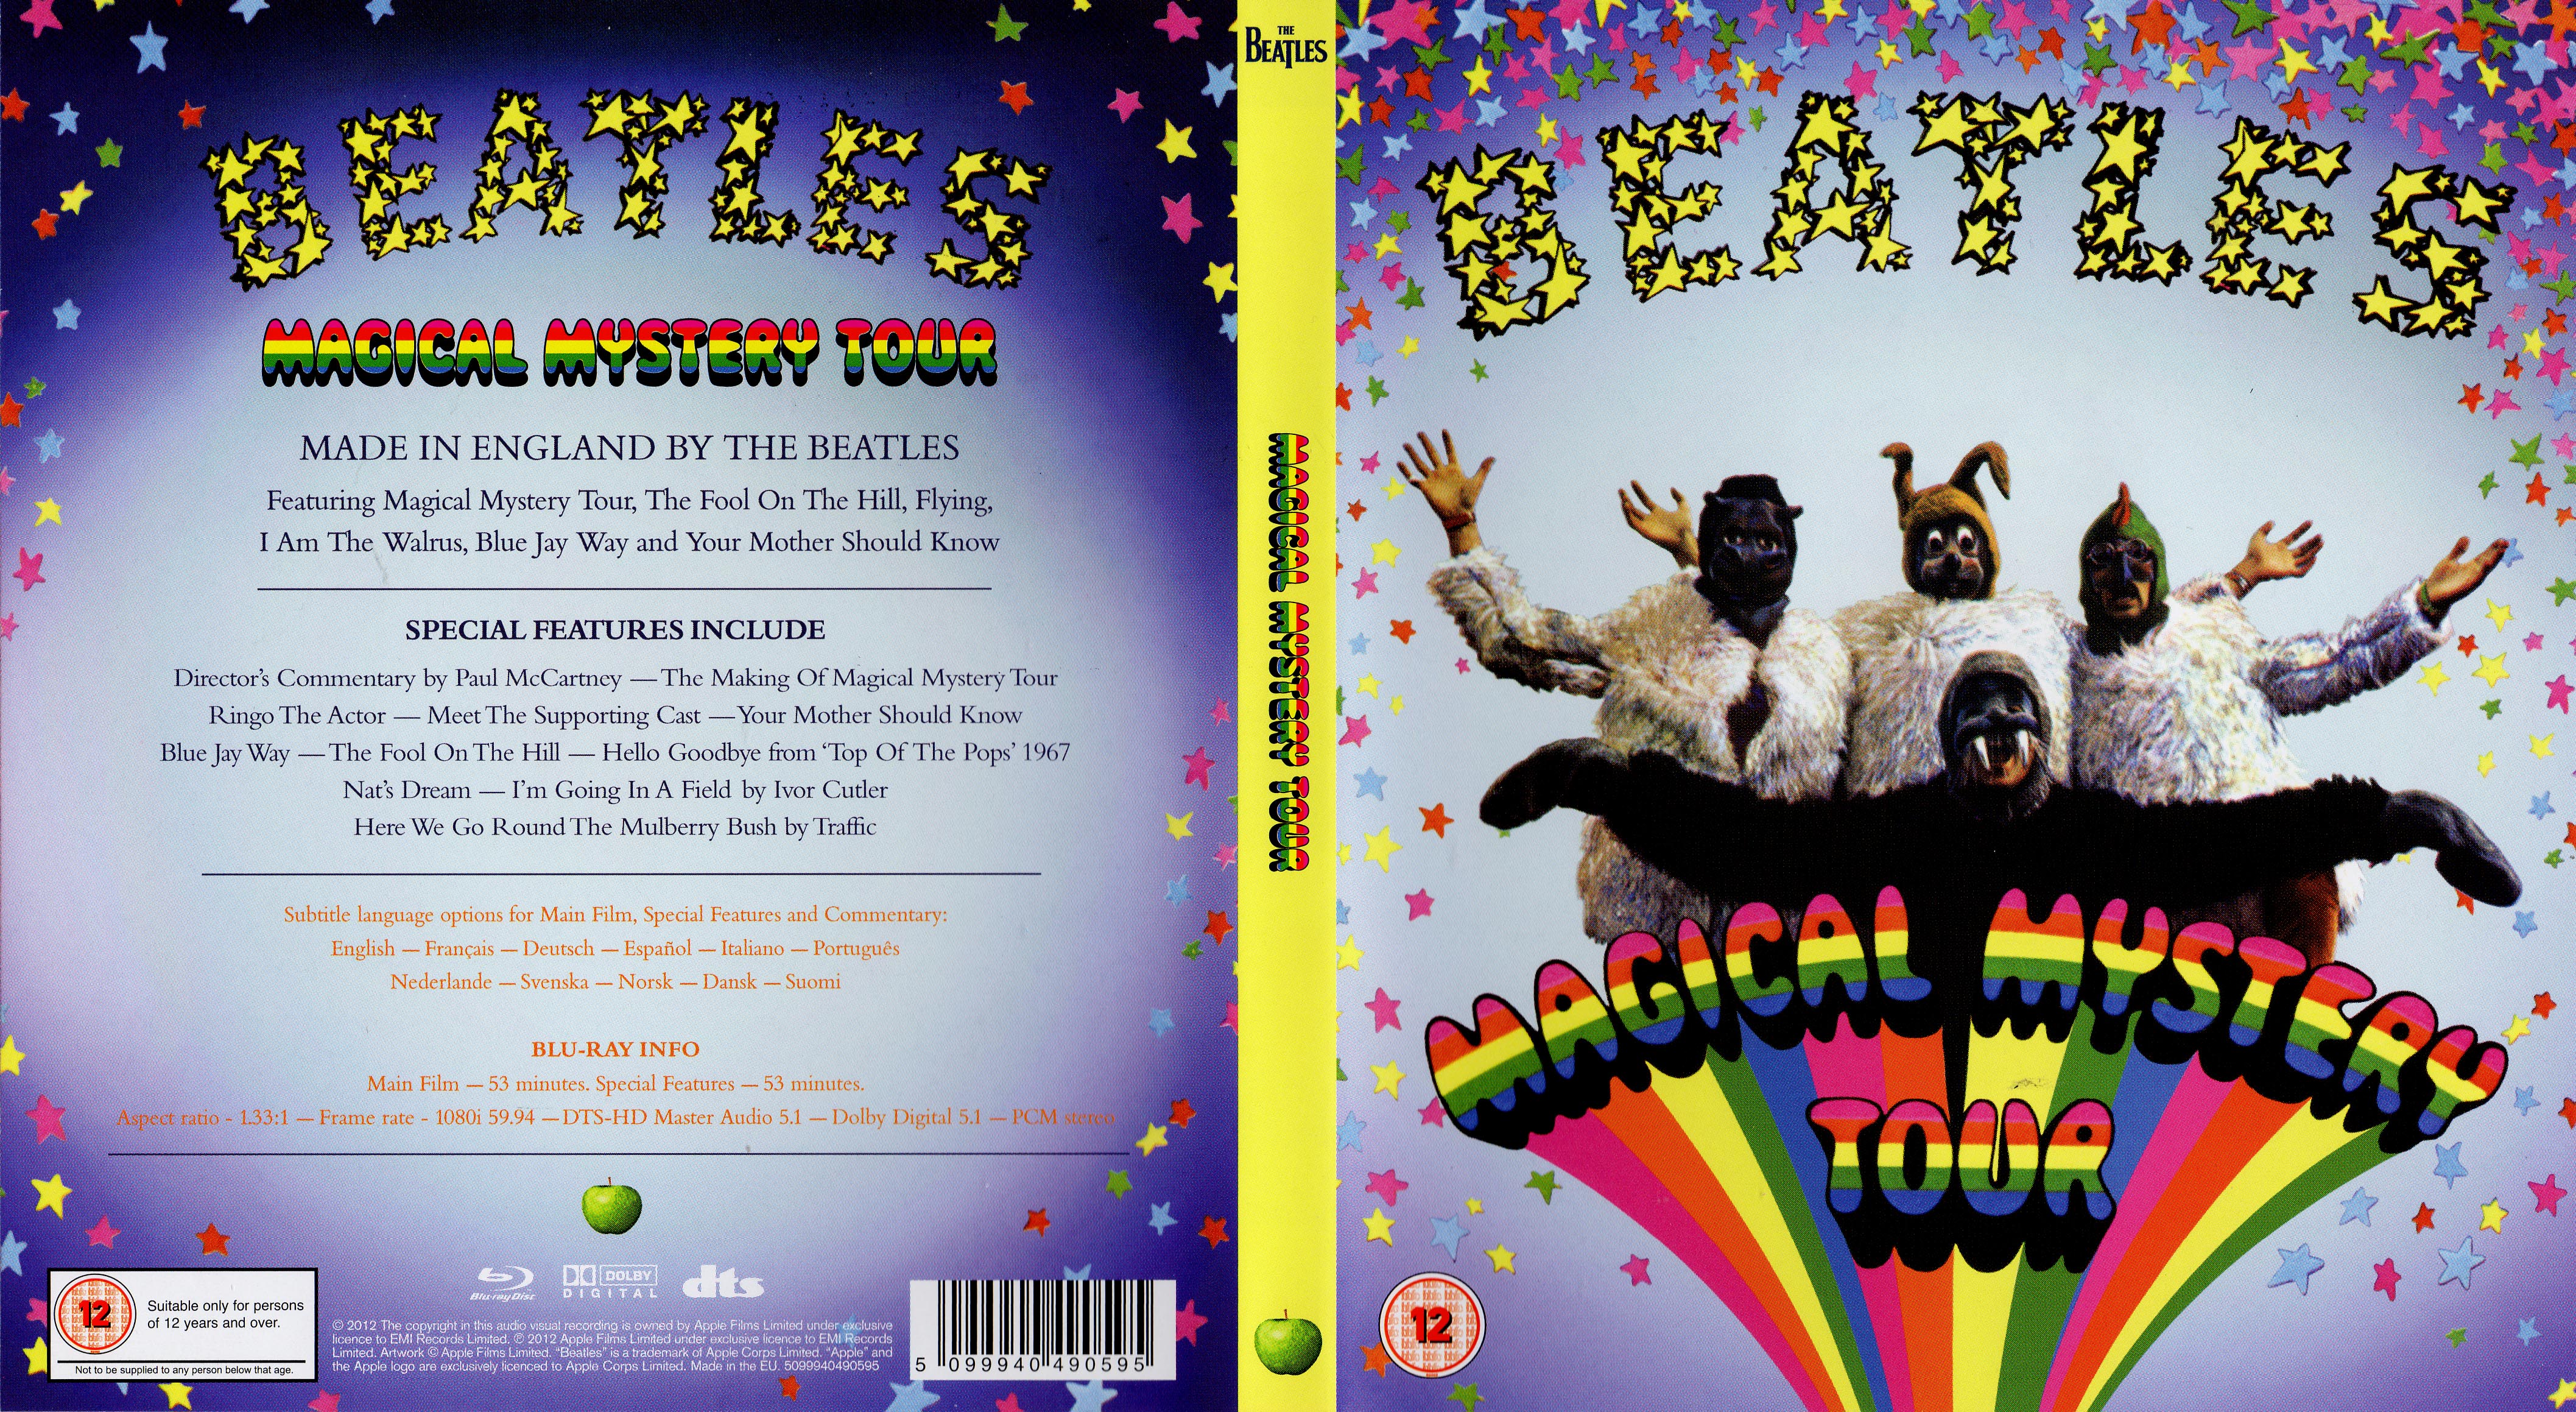 Jaquette DVD Beatles - Magical mystery tour Zone 1 (BLU-RAY)